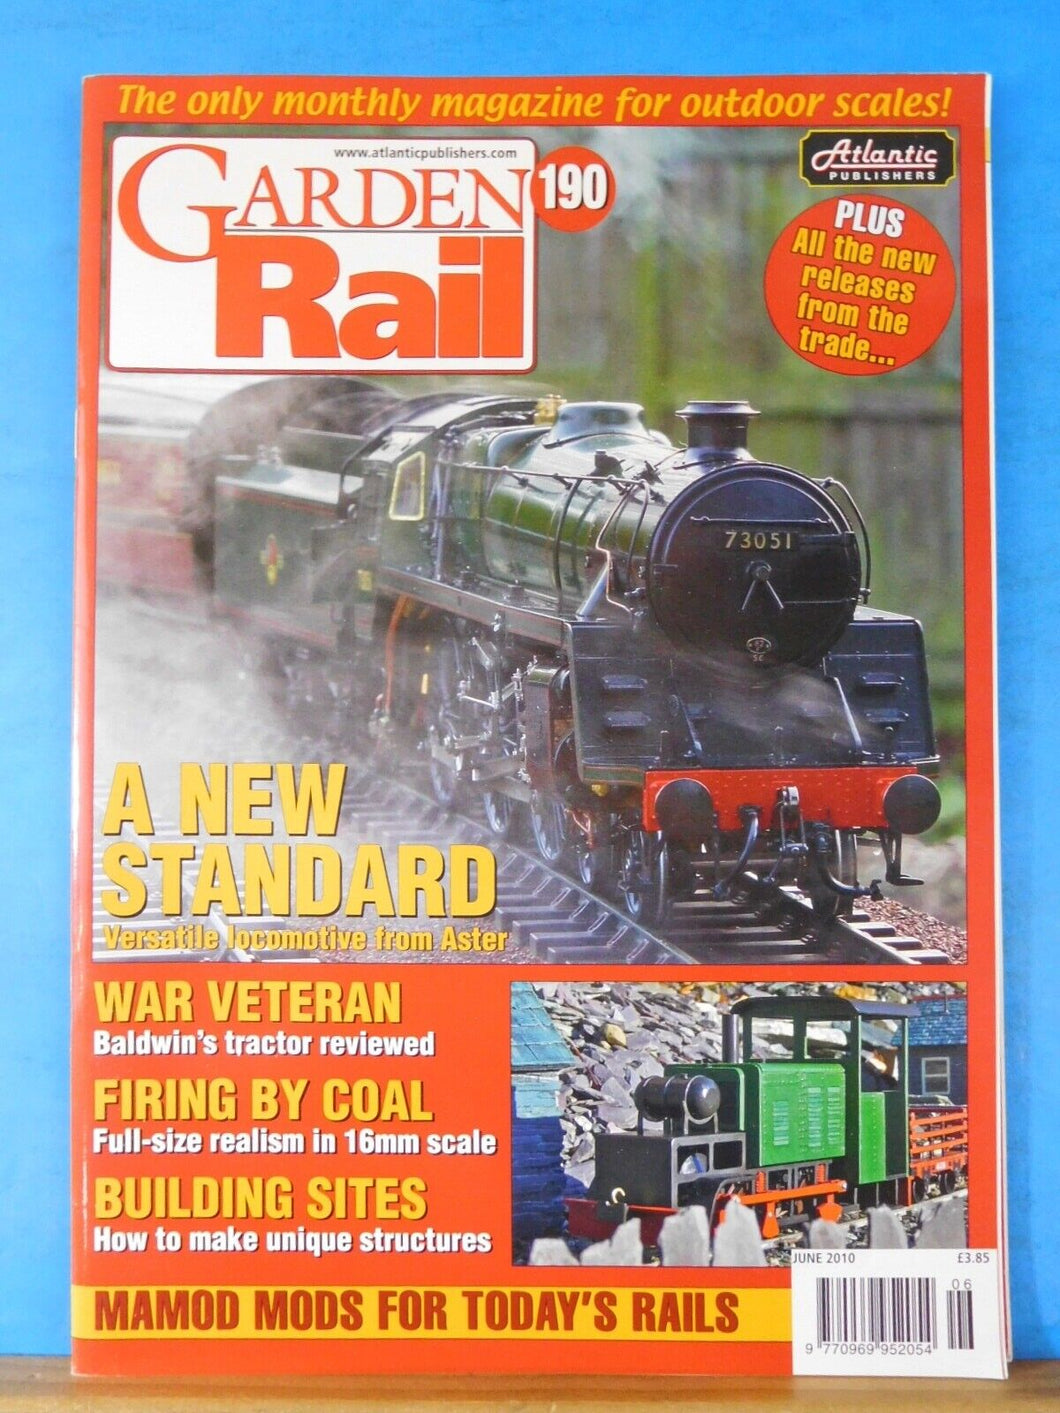 Garden Rail #190 June 2010 The monthly magazine for outdoor scales